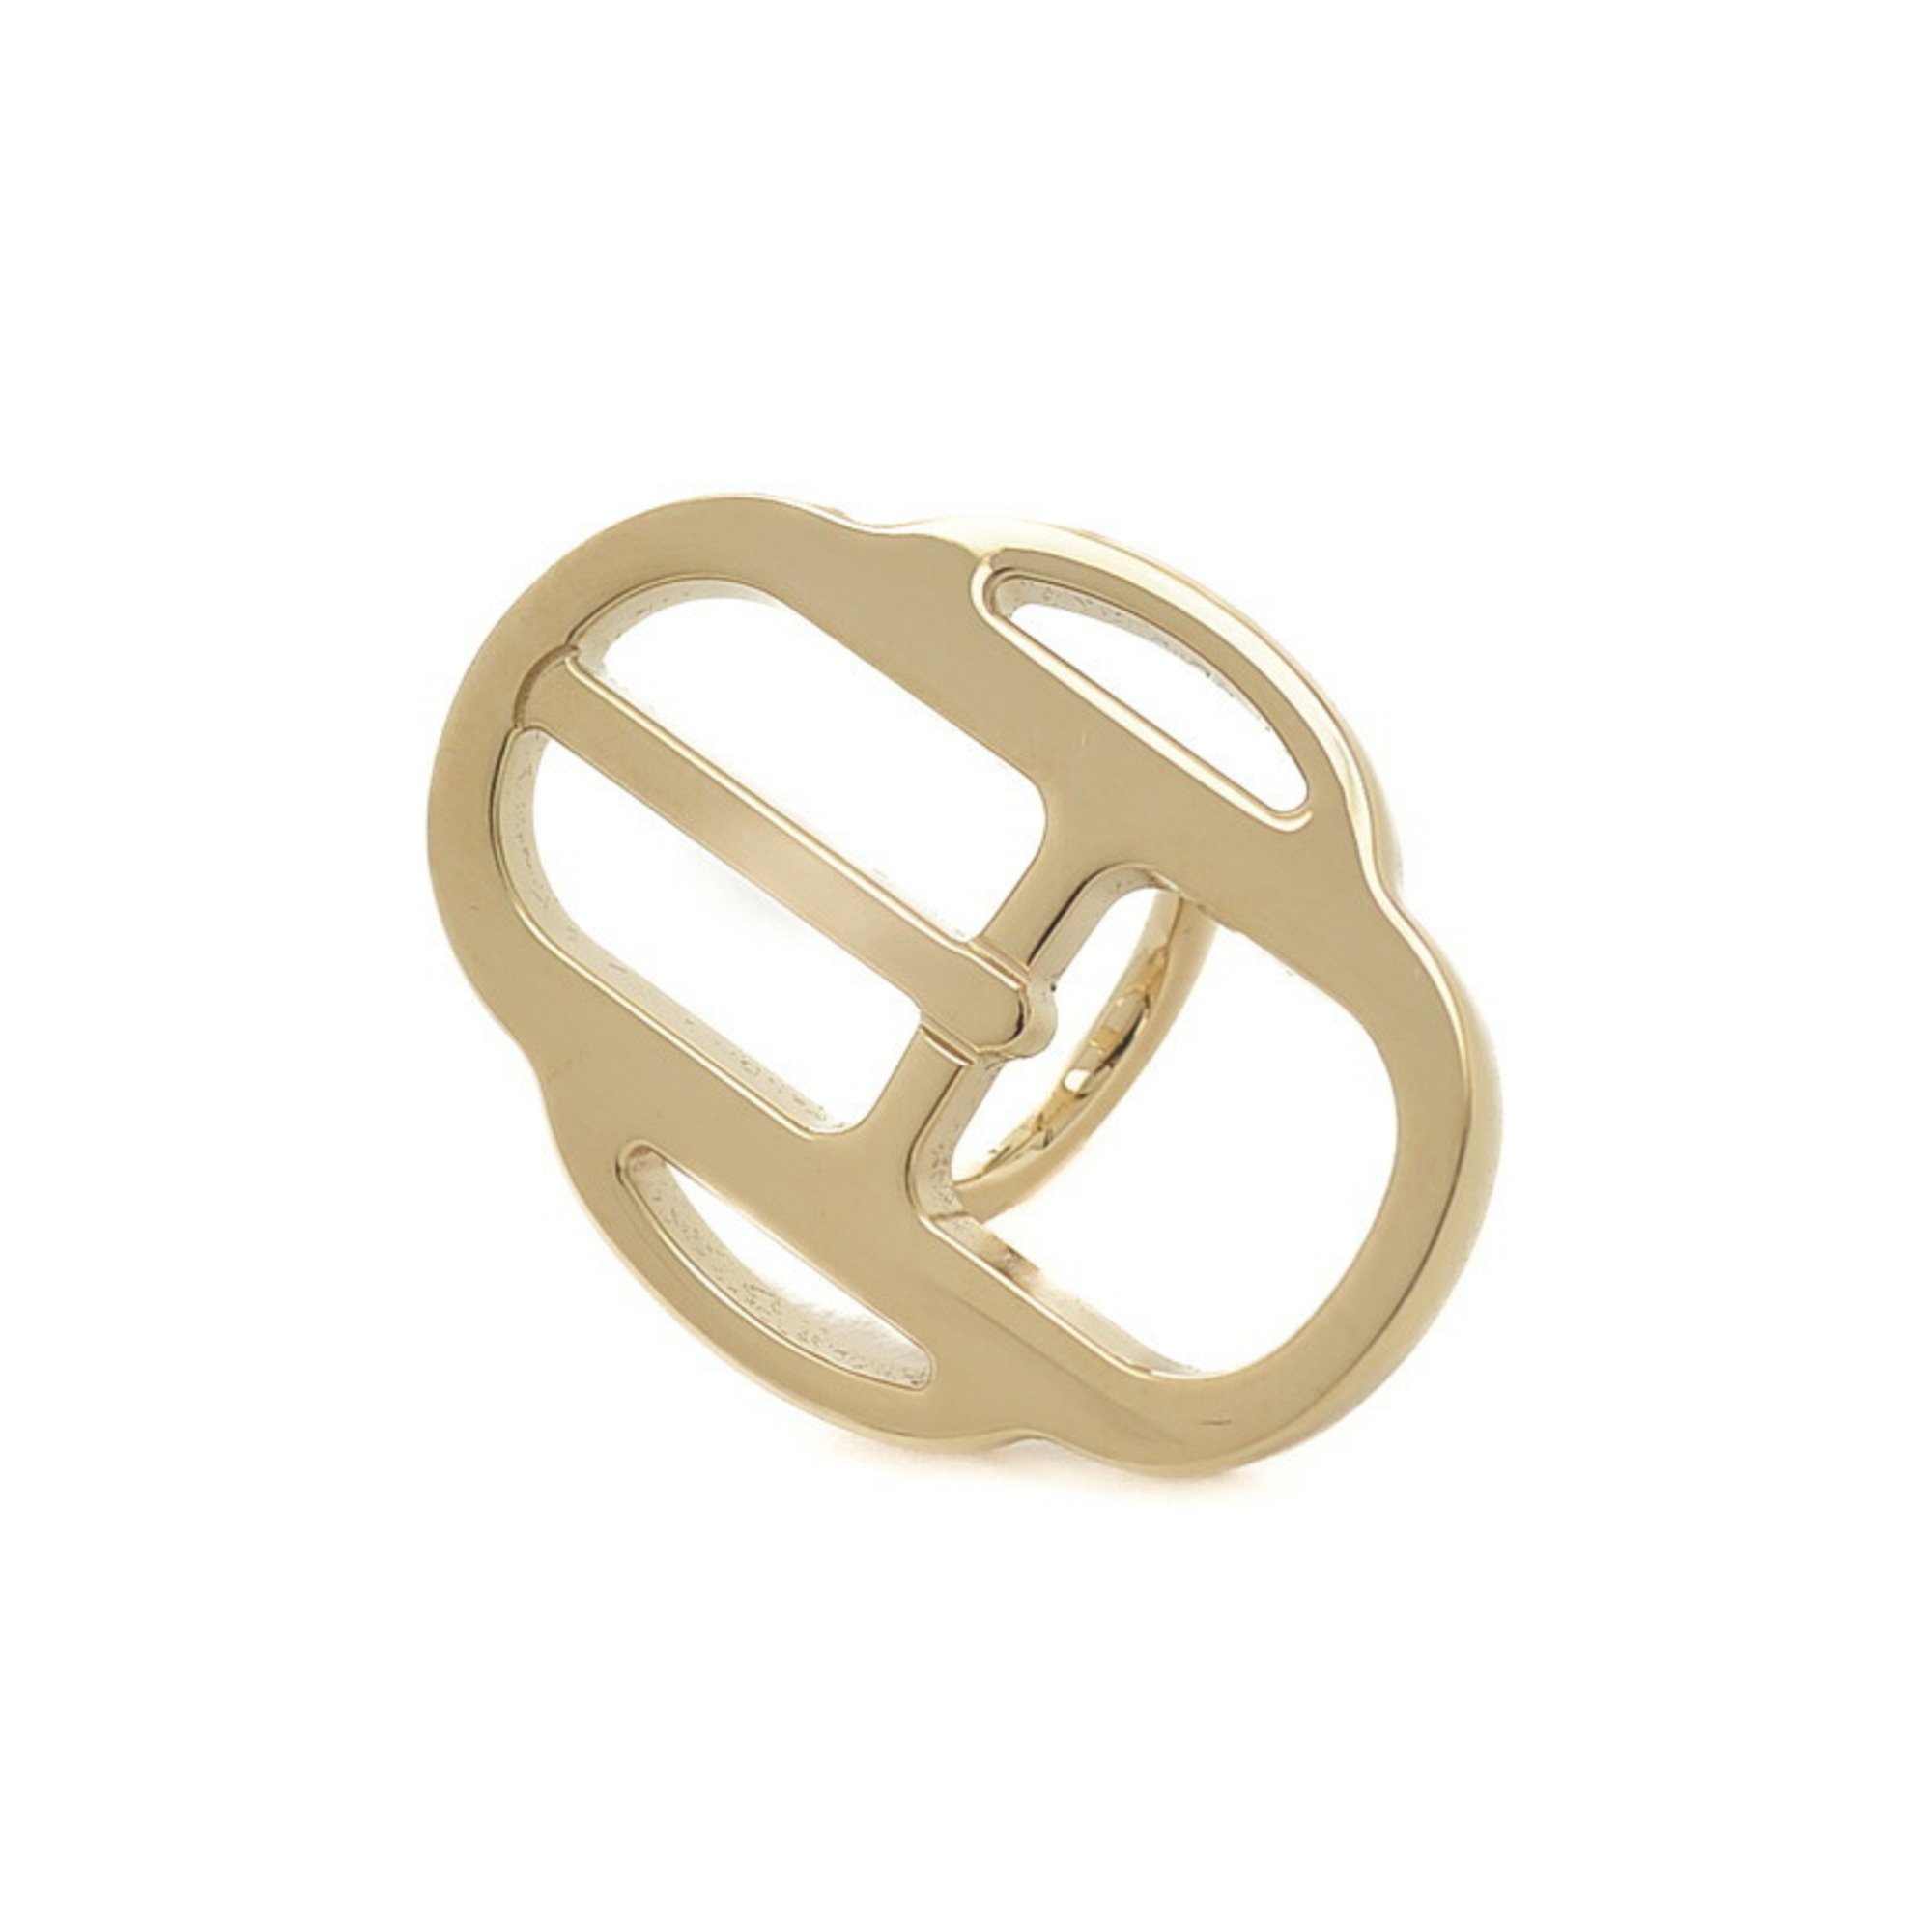 Hermes buckle scarf ring twilly metal gold